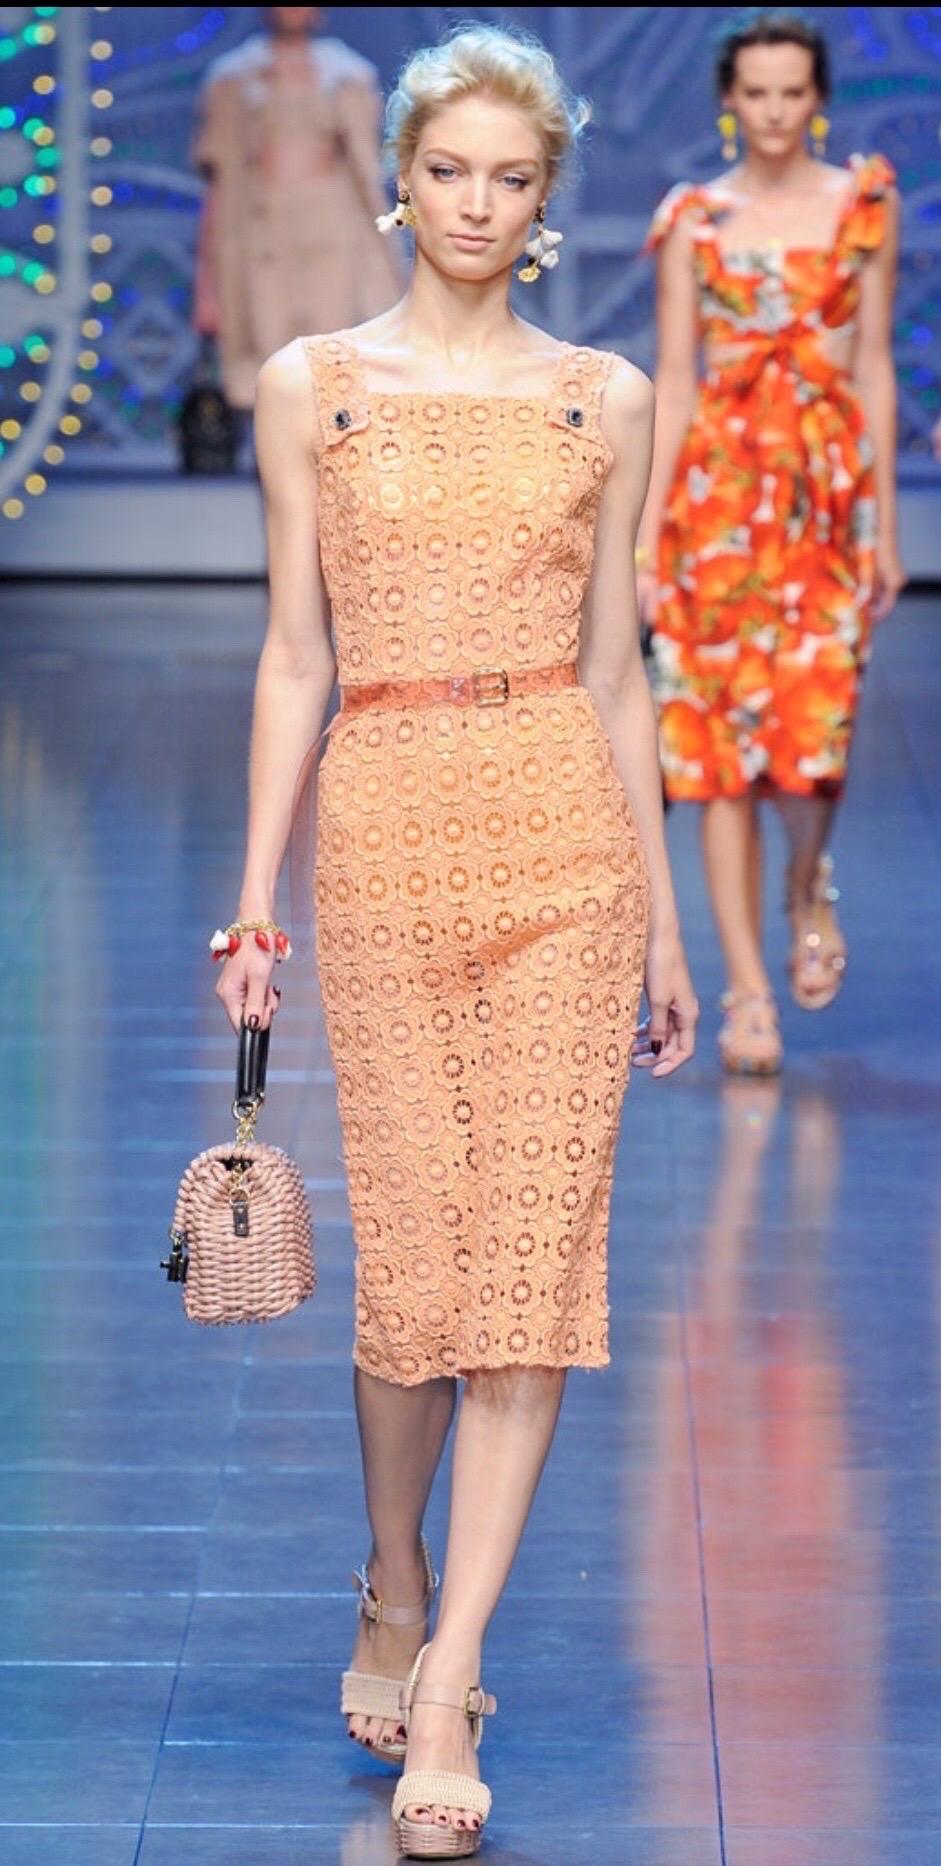 Stunning Dolce & Gabbana Coral Eyelet Shift Dress with Jeweled Button Details 1